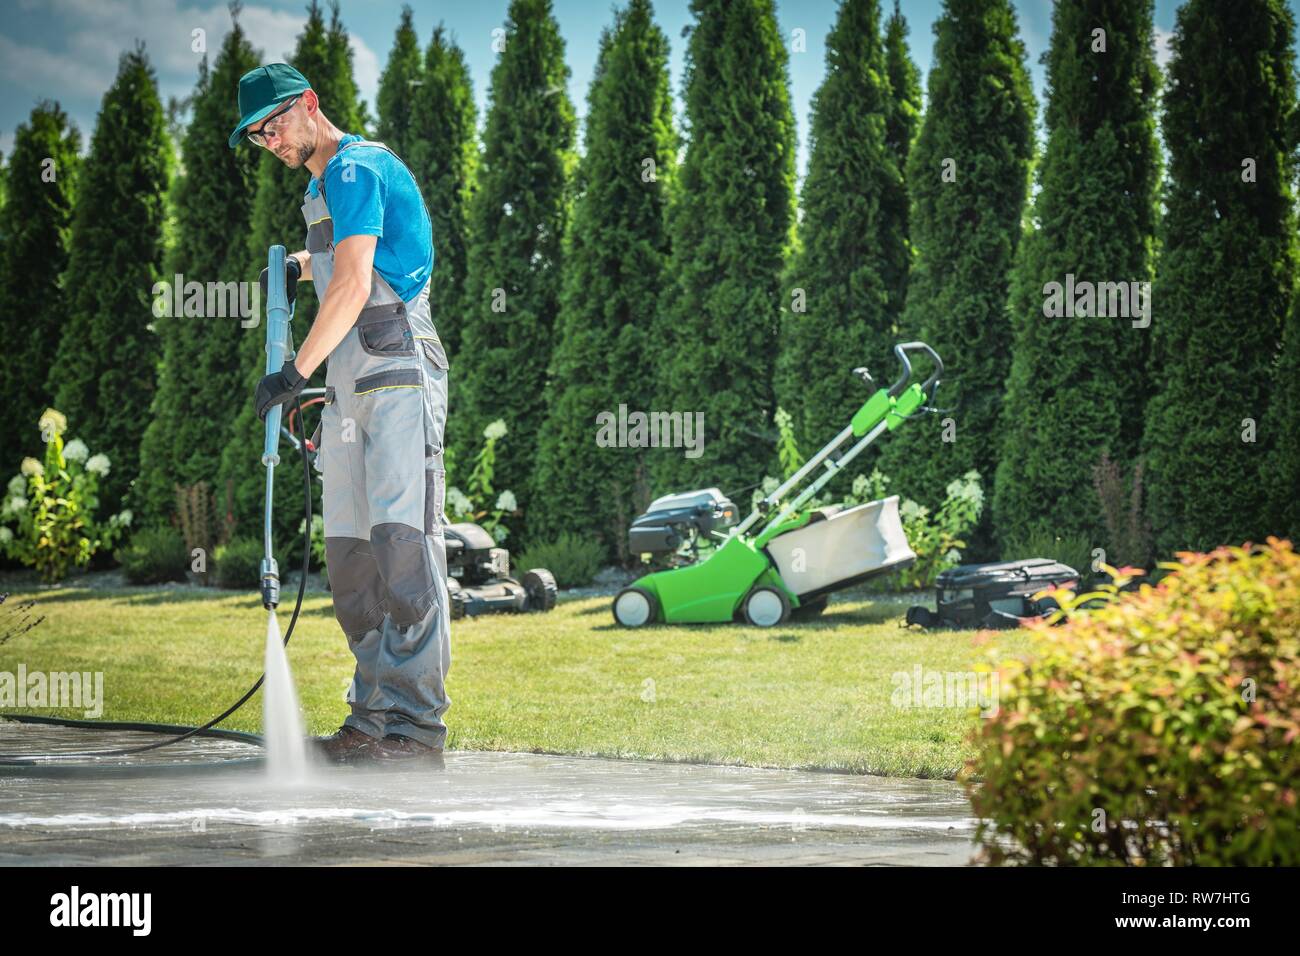 Caucasian Men in his 30s Cleaning Garden Paths and Driveway Using Professional Pressure Washer. Garden Equipment in the Background. Stock Photo